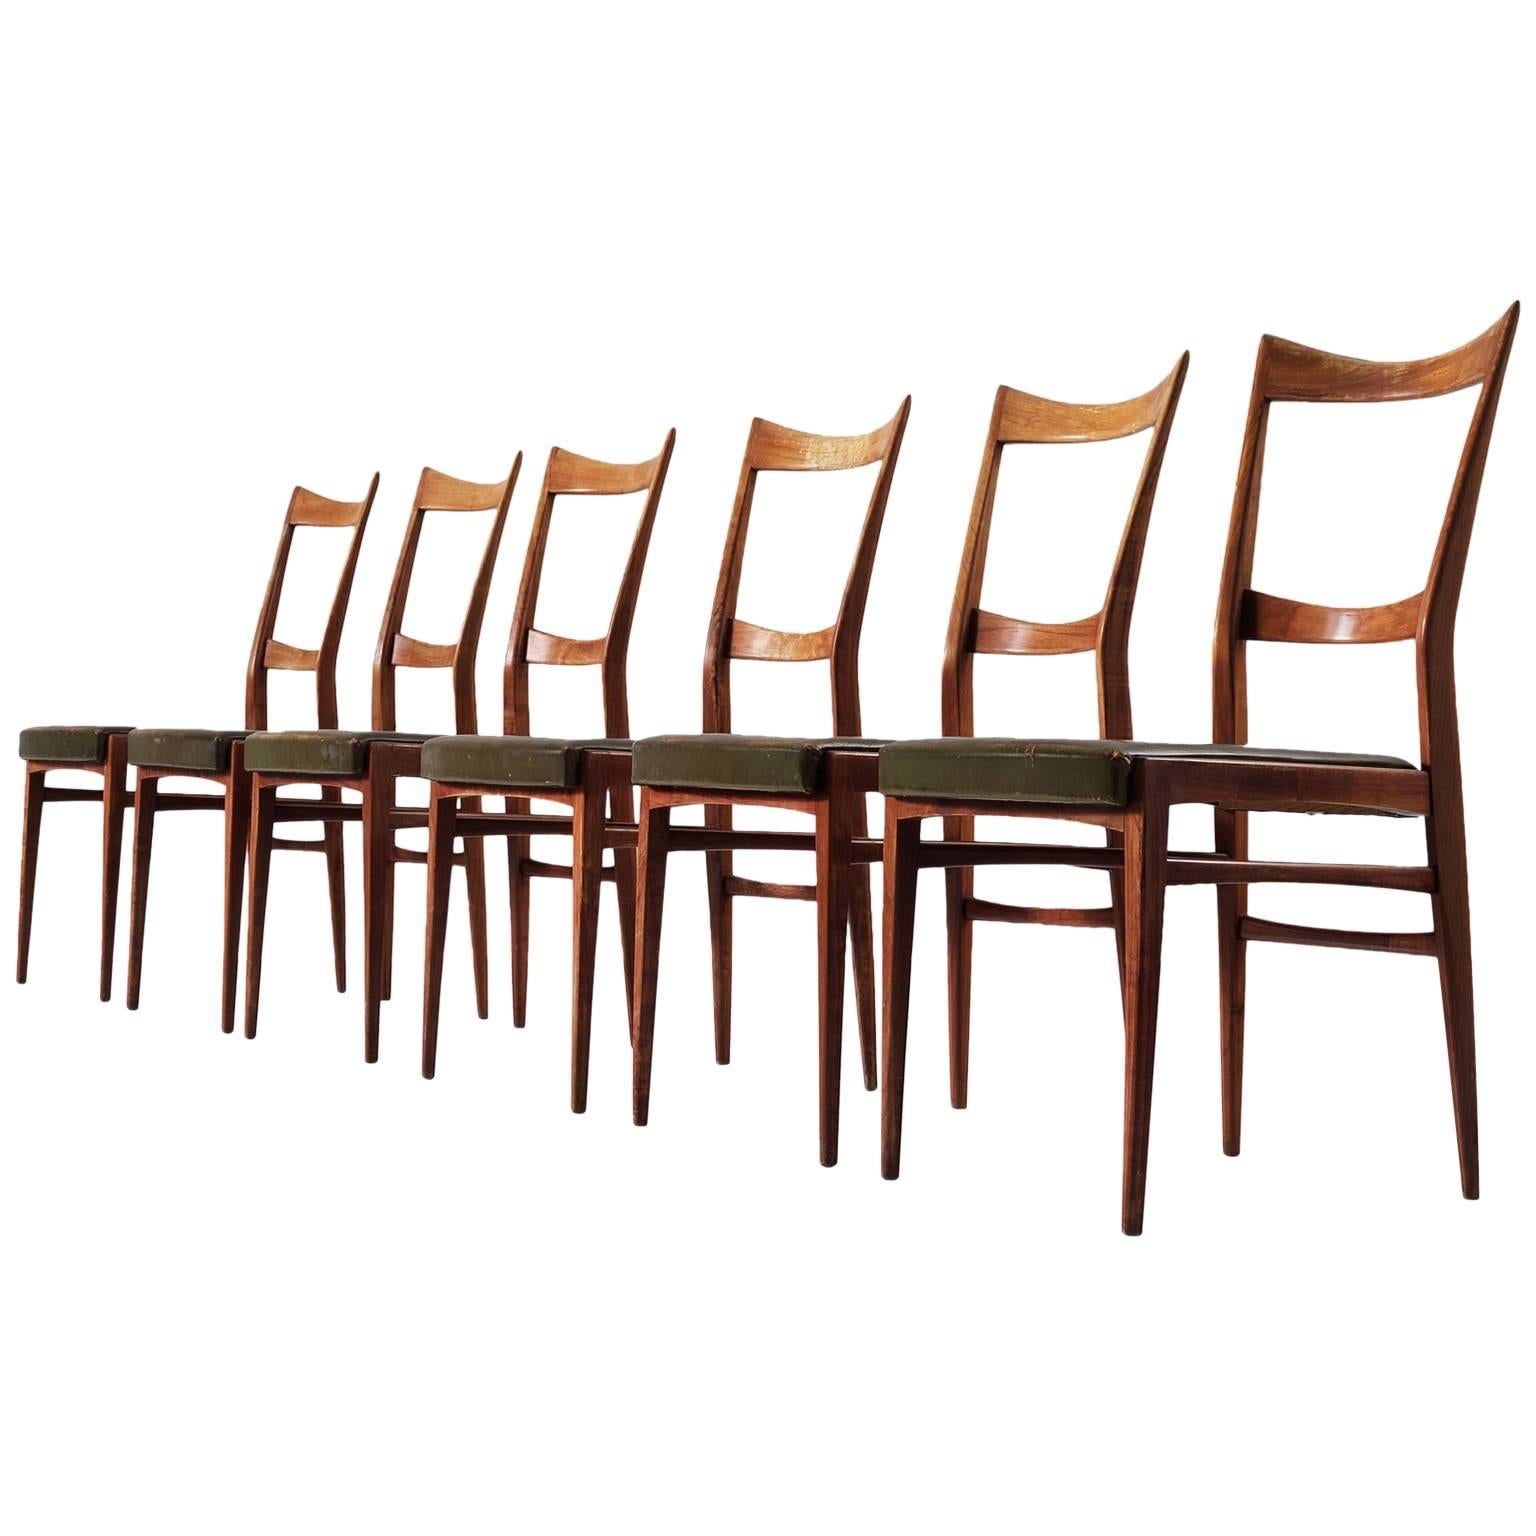 Set of Six Italian Dining Chairs in Walnut and Green Leather Upholstery